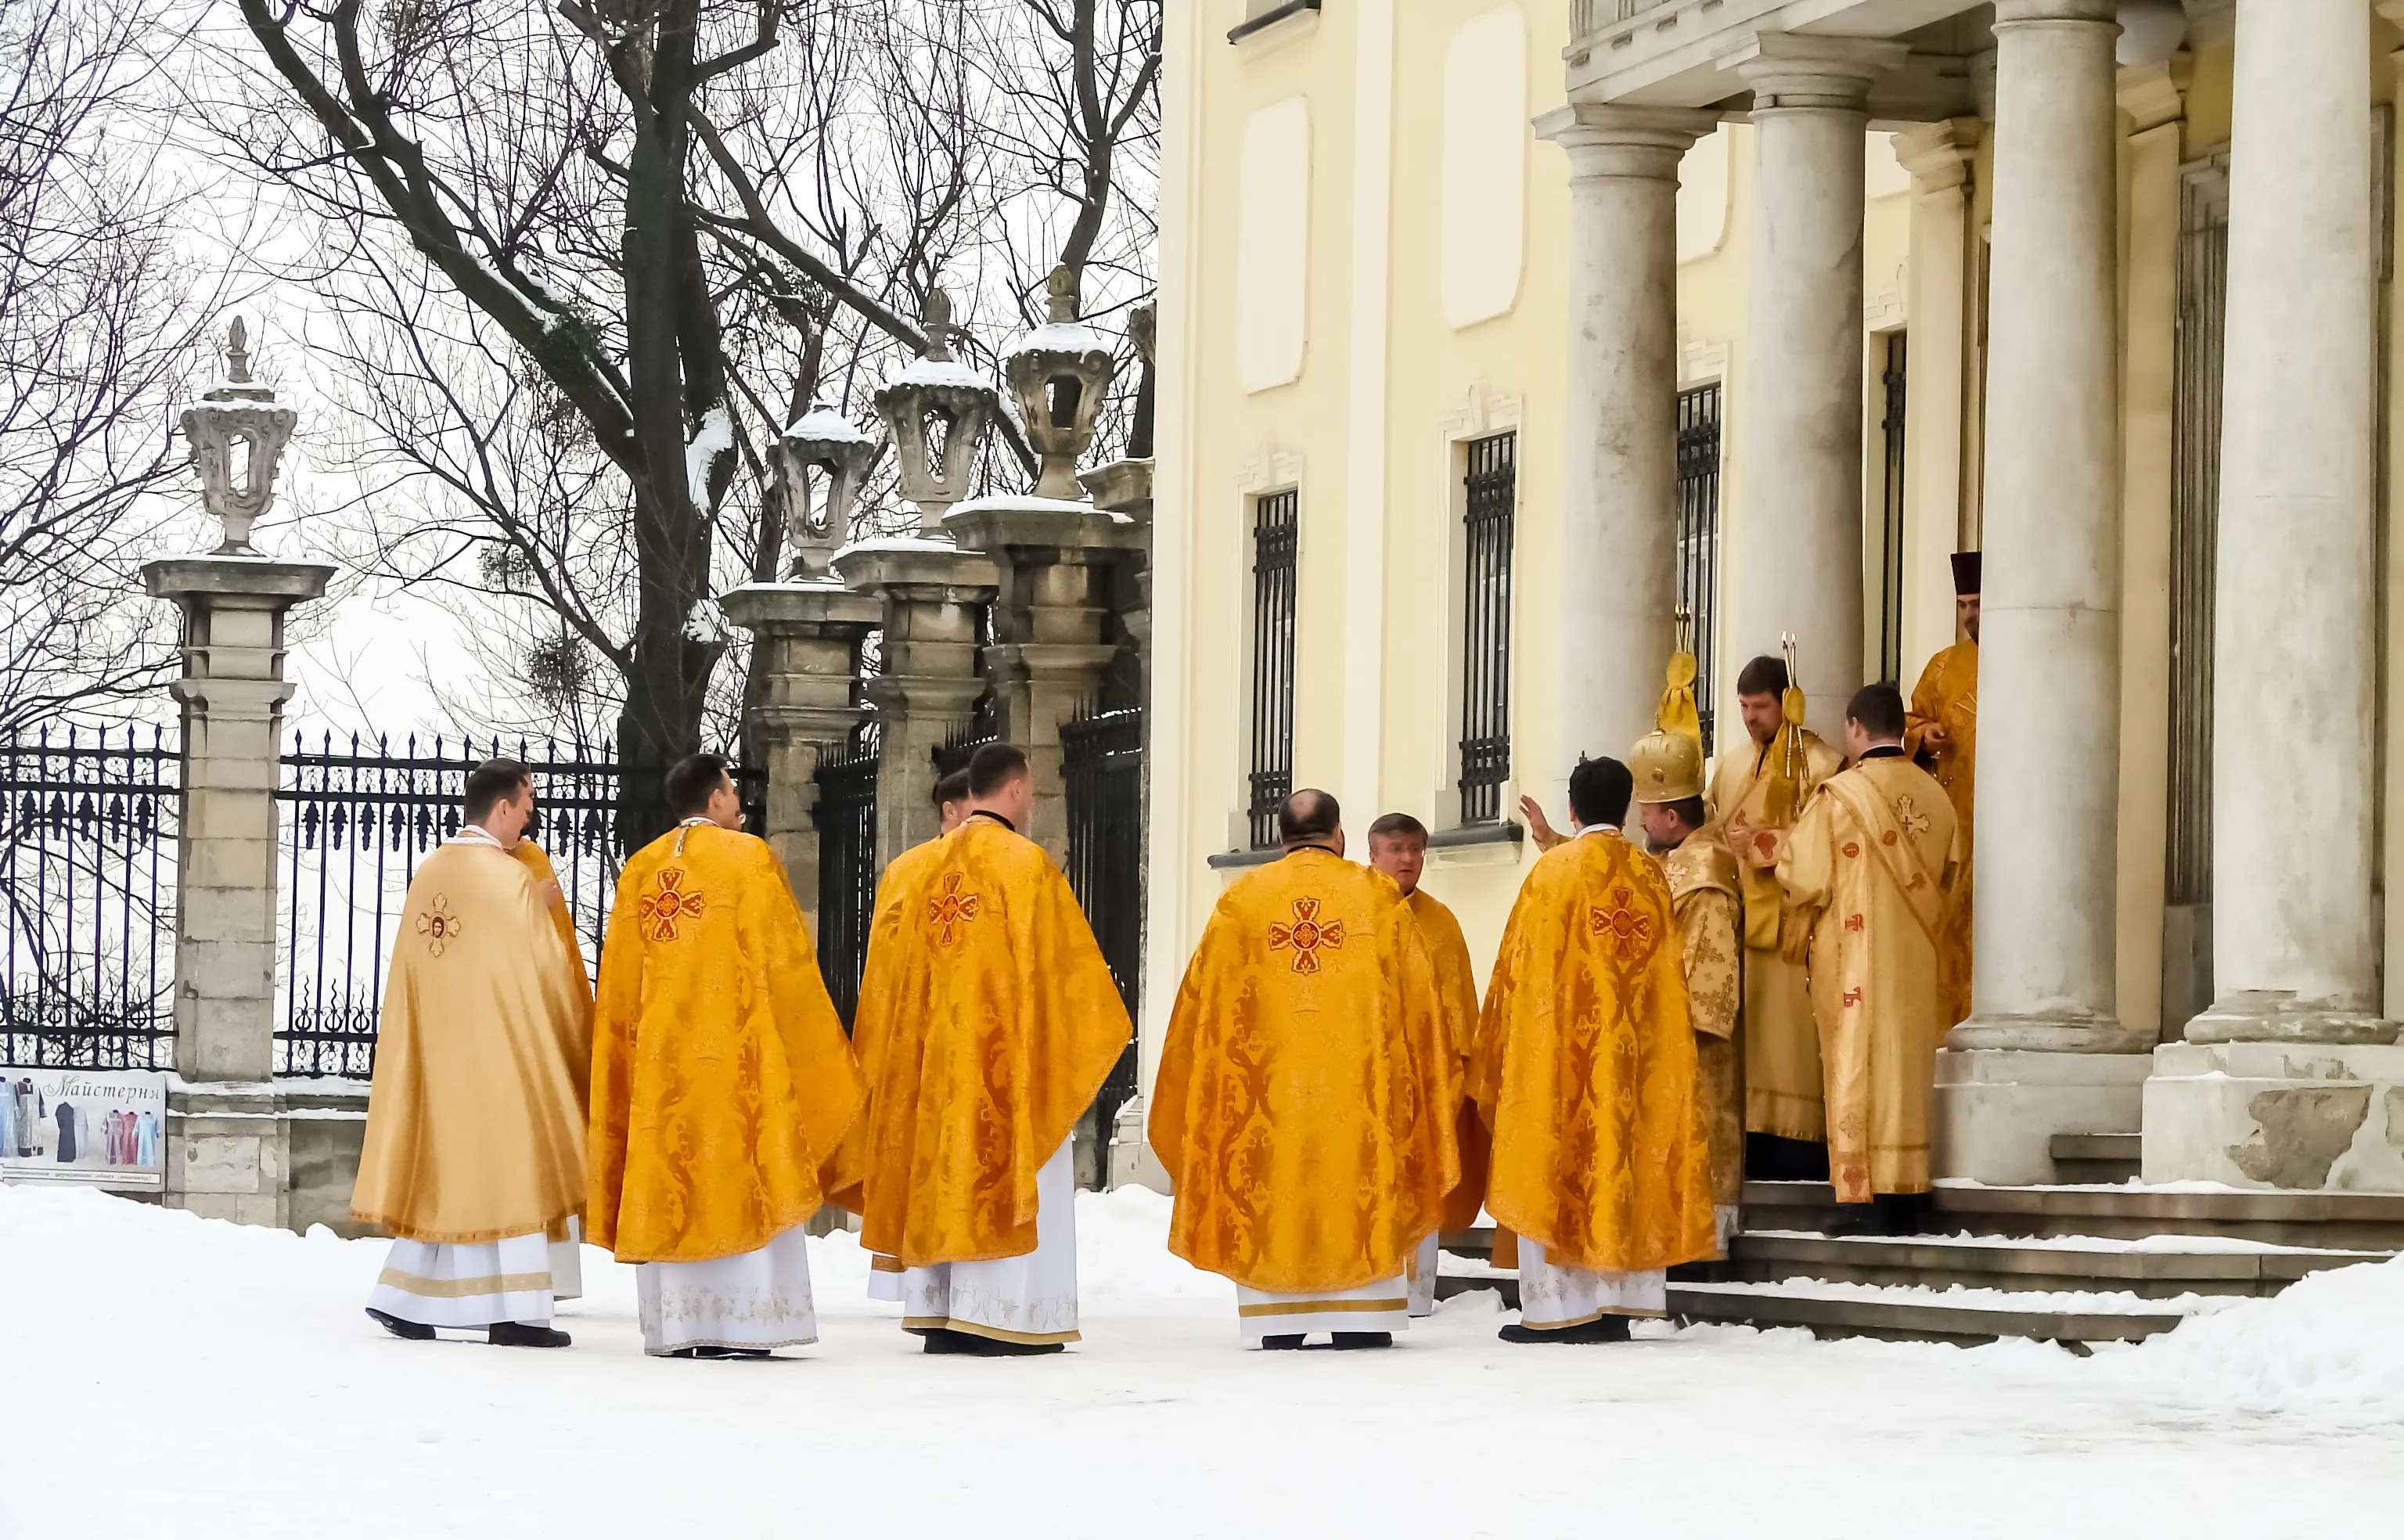 Greek-Catholic priests in phelonia in front of a church in Lviv, Ukraine, in 2018.?w=200&h=150